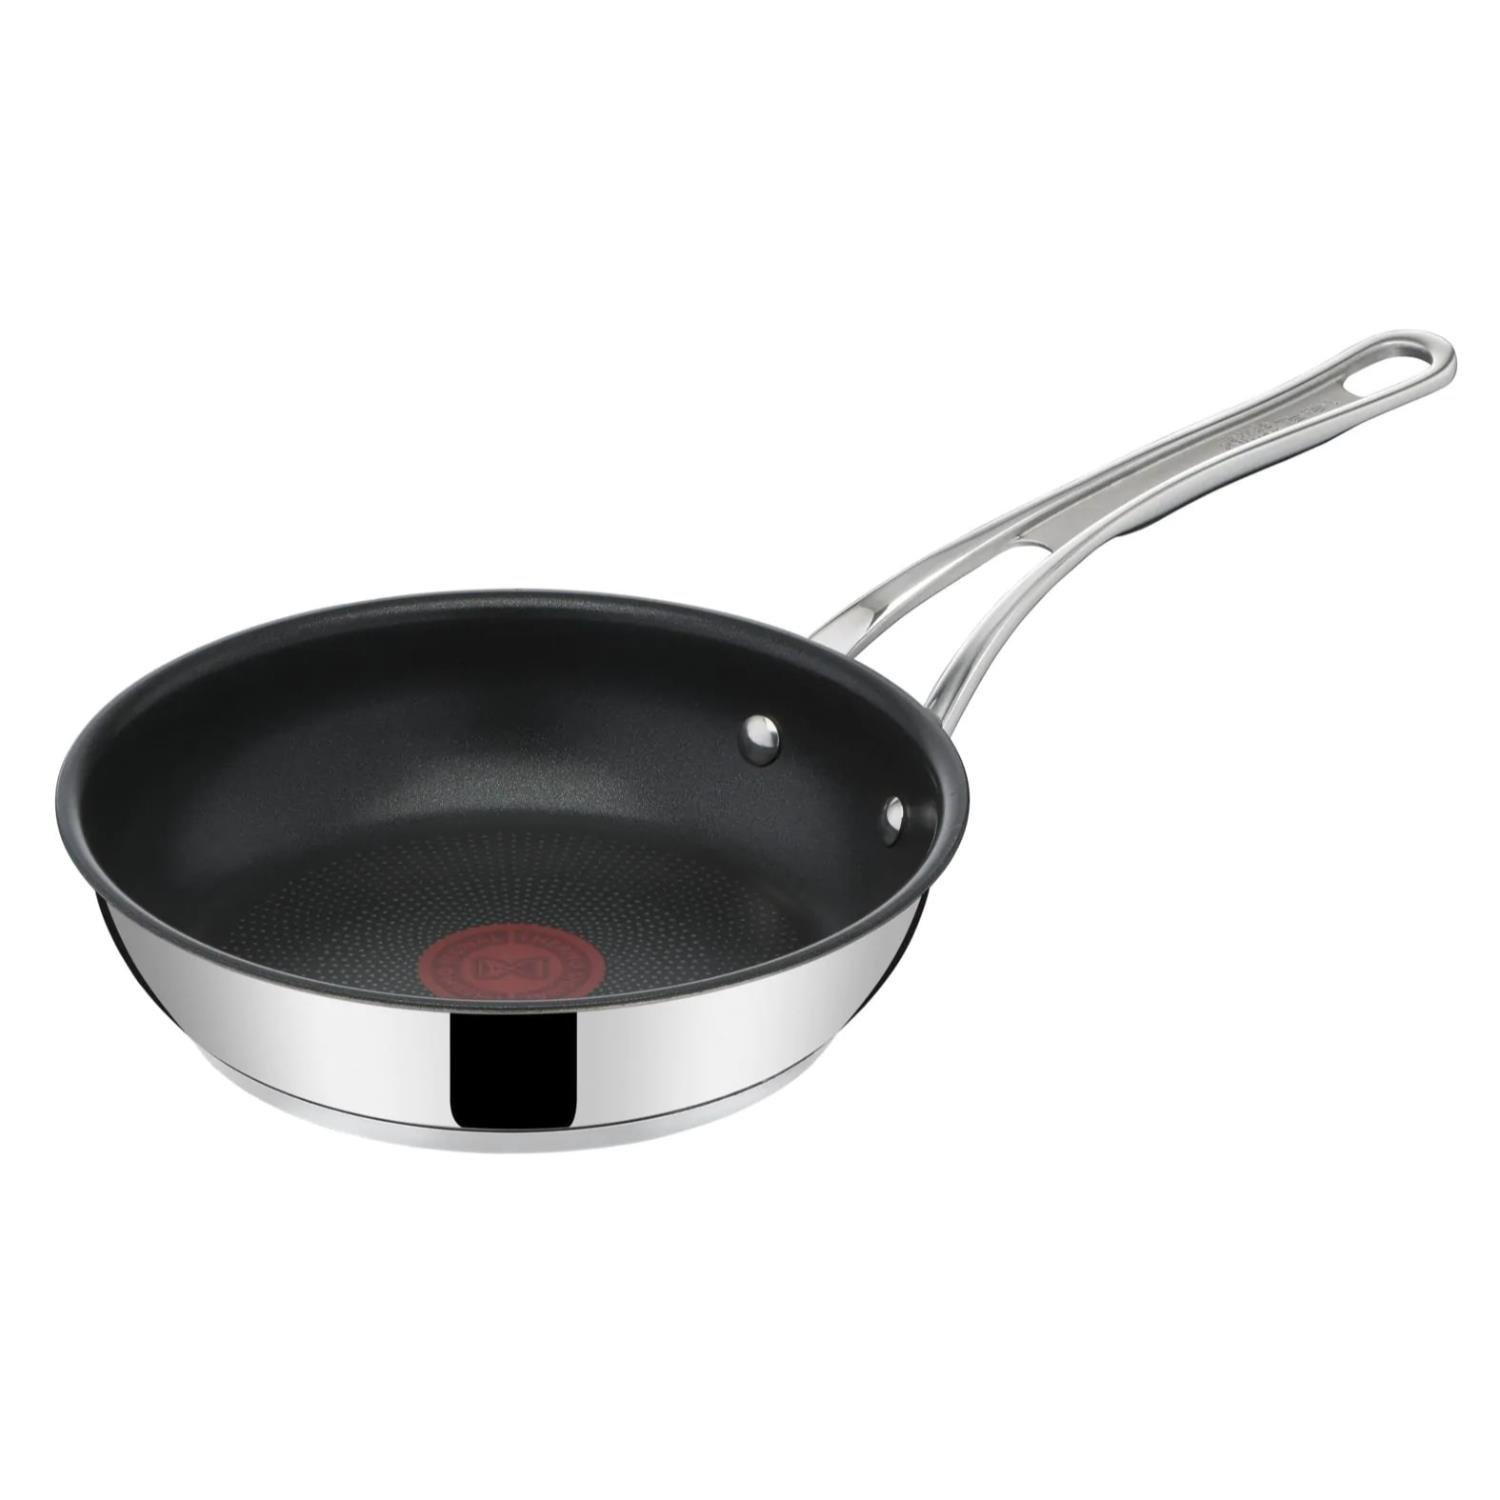 Jamie Oliver Cooks Classics Stainless Steel 30cm Frypan